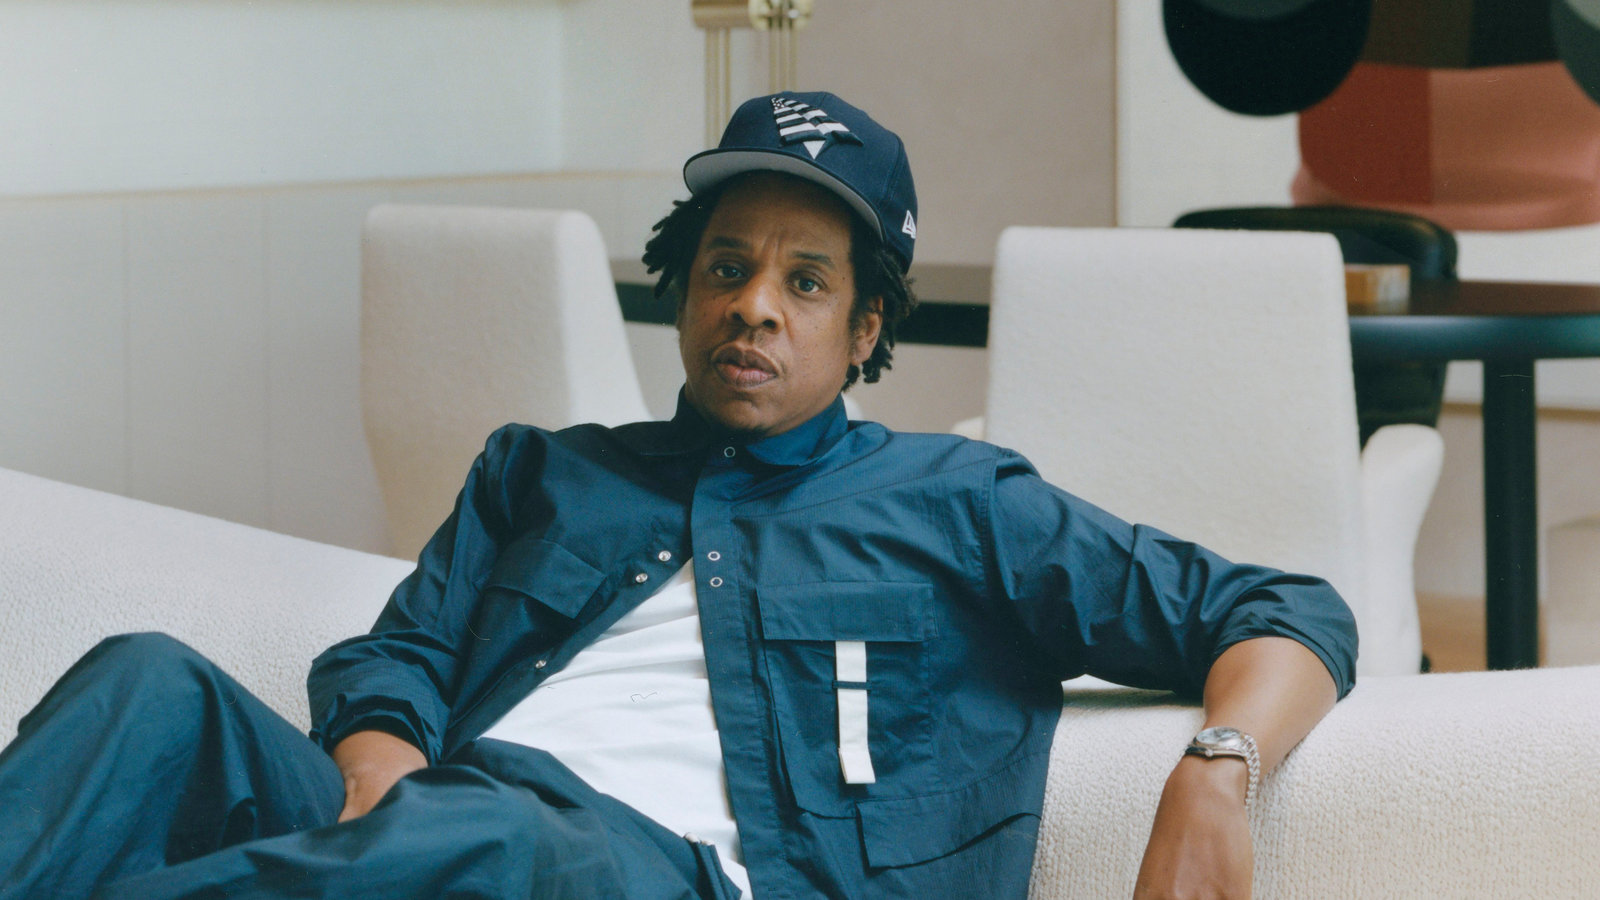 Jay-Z invests in fitness startup that aims to rival Beyoncé’s Peloton